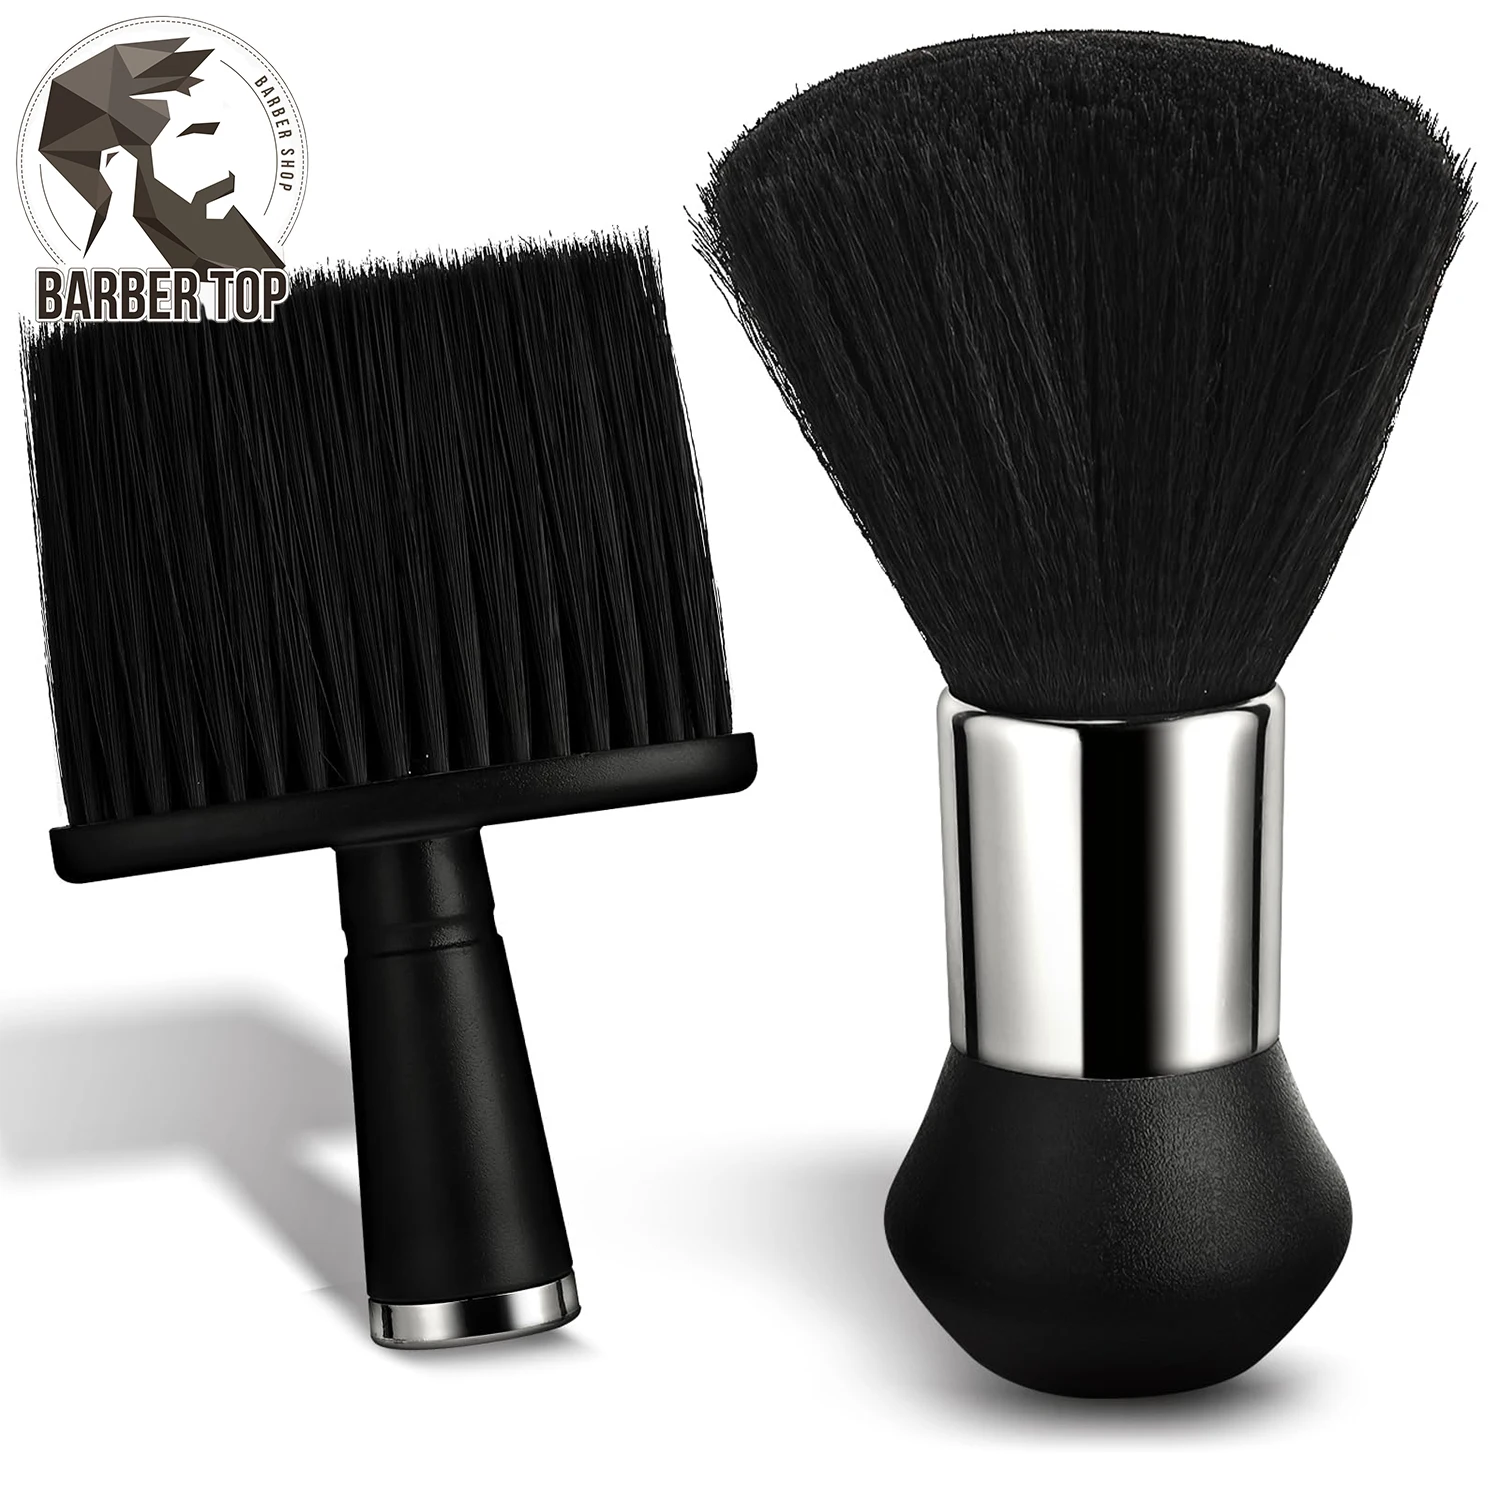 2Pcs Neck Duster Barber Remove Loose Hair Brush Professional Hair Cutting Brush Soft Hair Cleaning Brush Hairdressing Tools 2pcs countersink drill bit 7 flute metal woodworking drill bit 1 4inch hex shank metal chamfer drilling bit remove burr tools